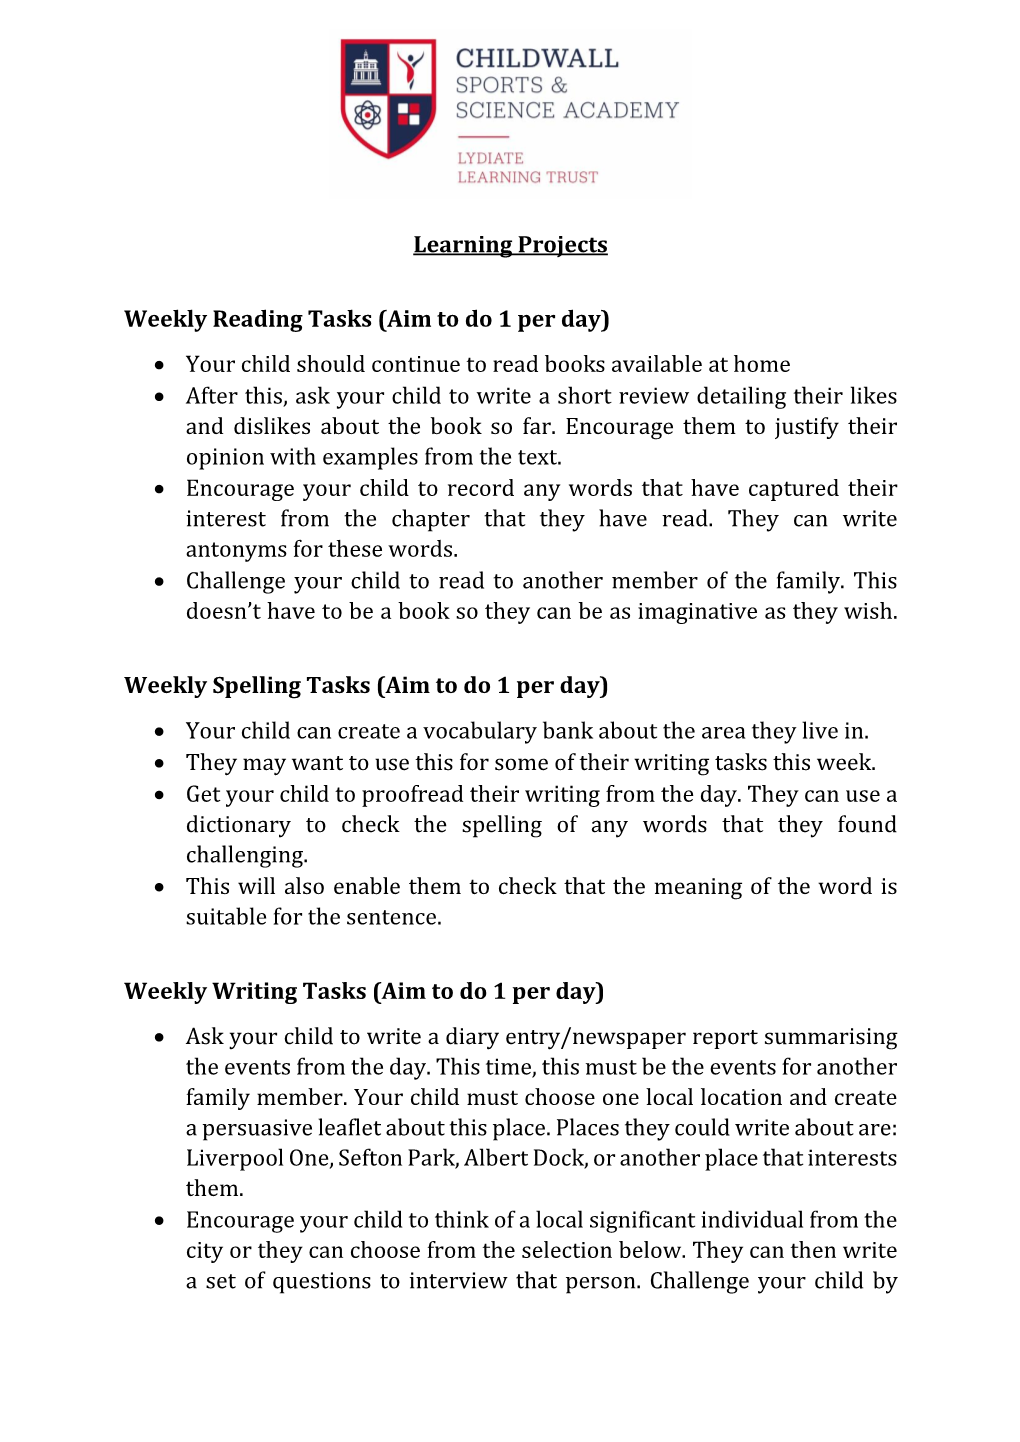 Learning Projects Weekly Reading Tasks (Aim to Do 1 Per Day)